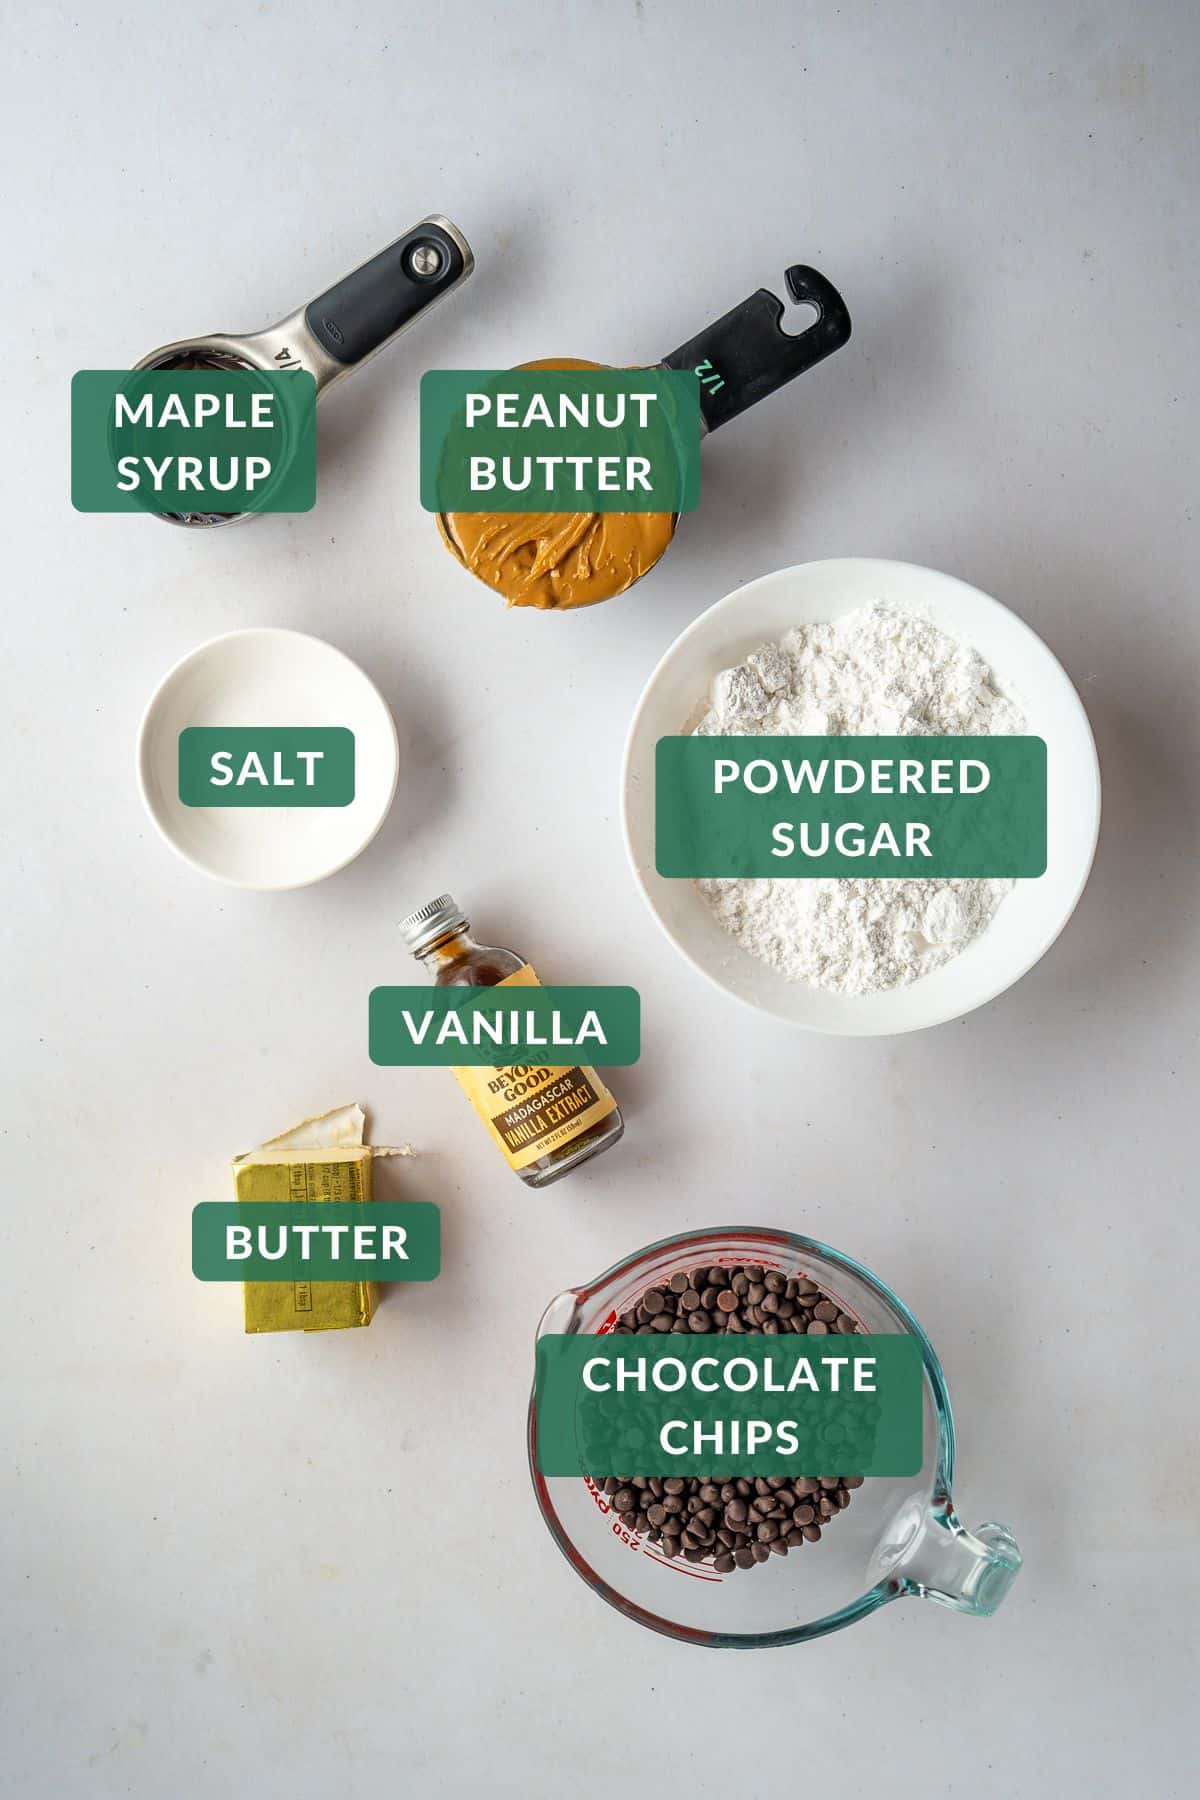 The 8 common ingredients needed to make peanut butter truffle balls.